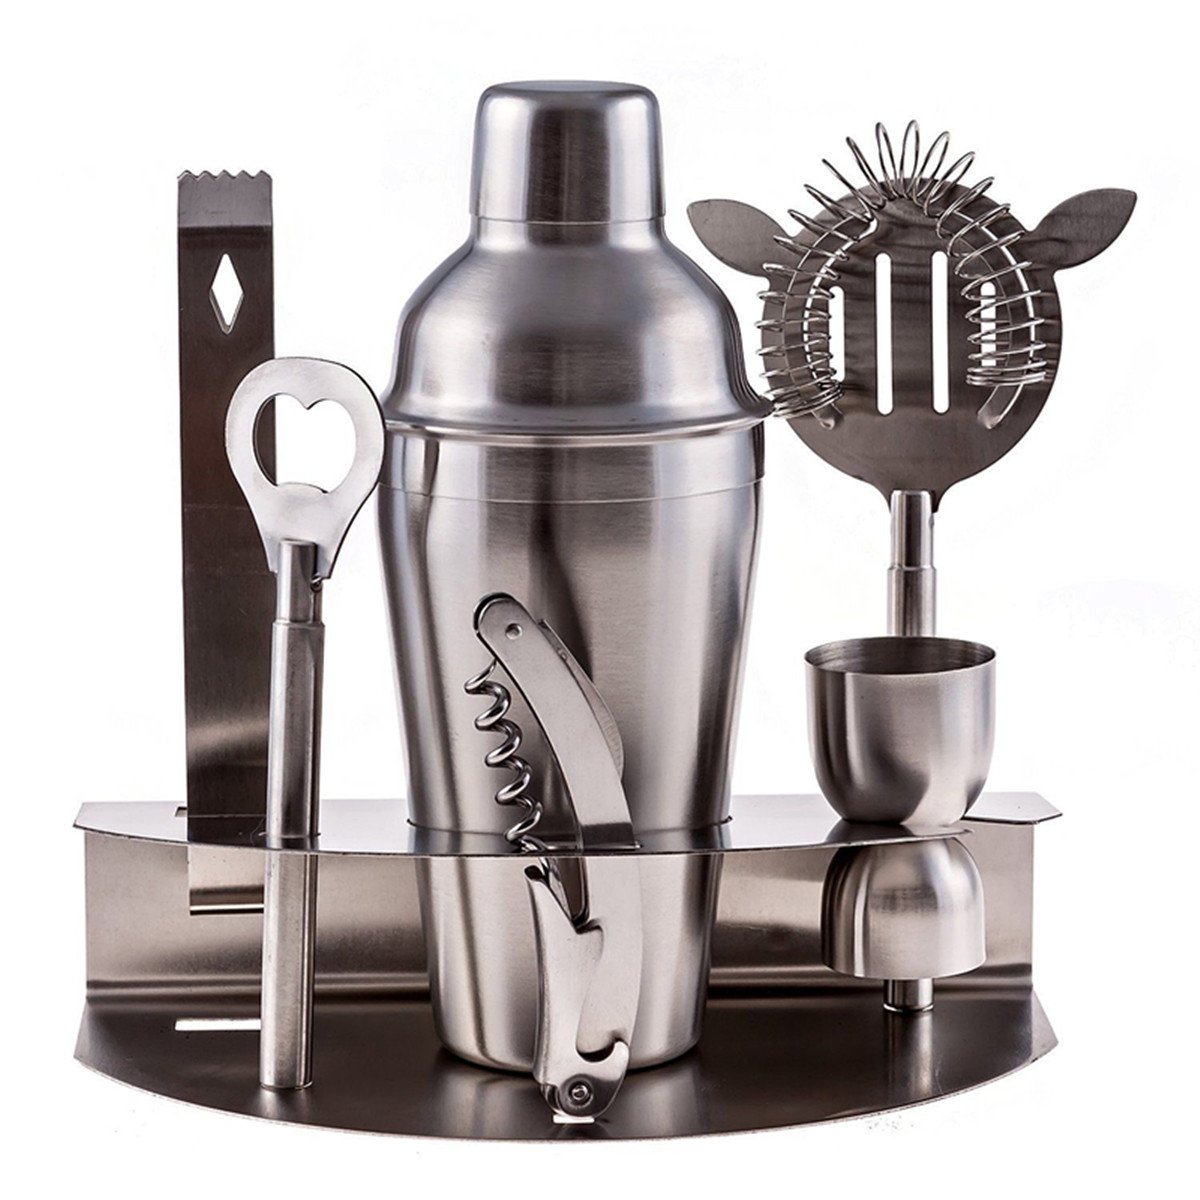 

7PCS Stainless Steel Cocktail Shakers Mixer Drink Bartender Martini Bar Set Tools Kit